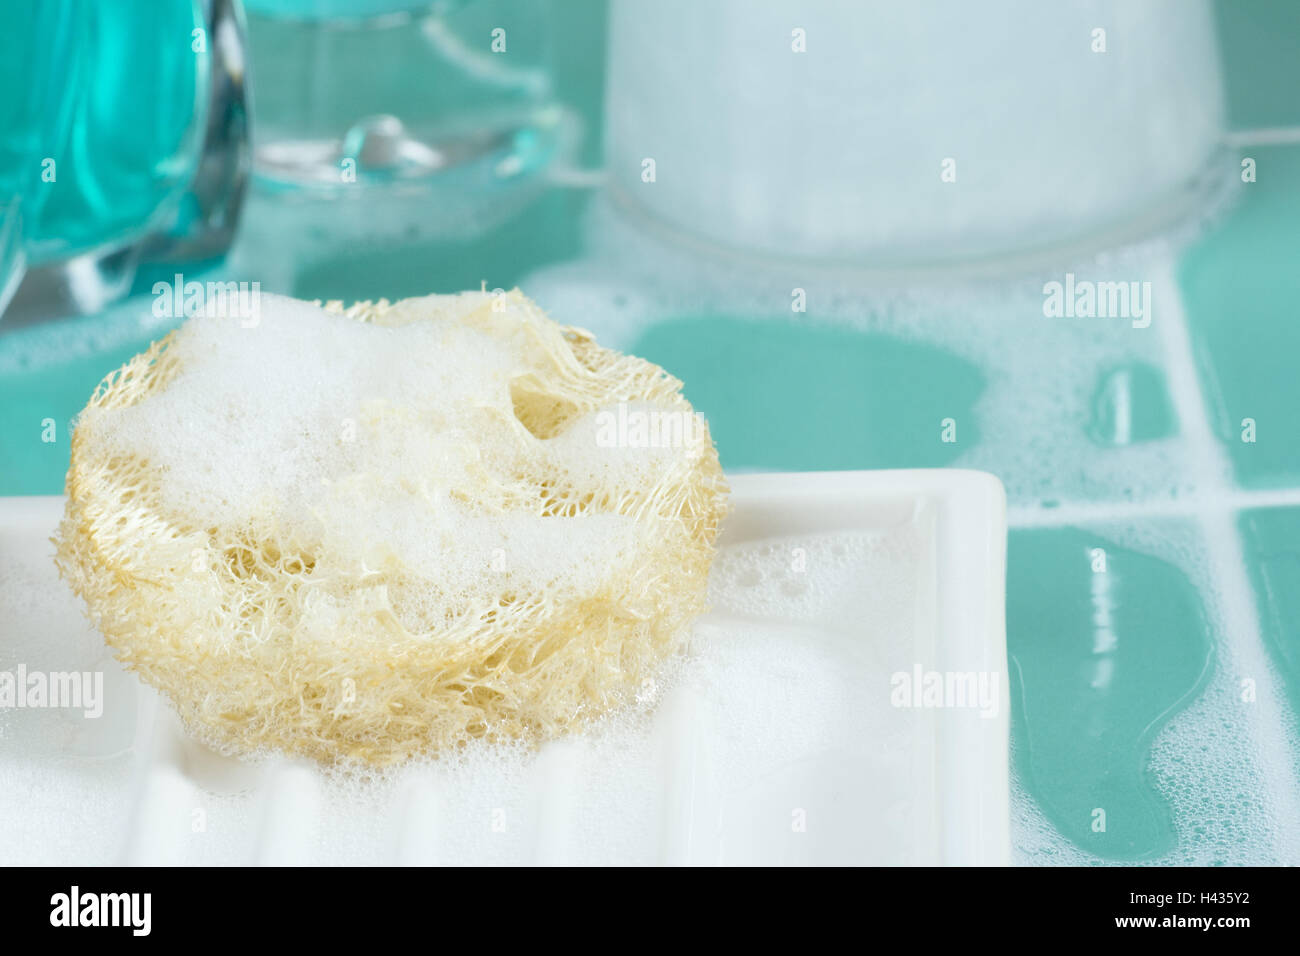 Glass decanters, bath additions, froth, fungus, detail, Stock Photo